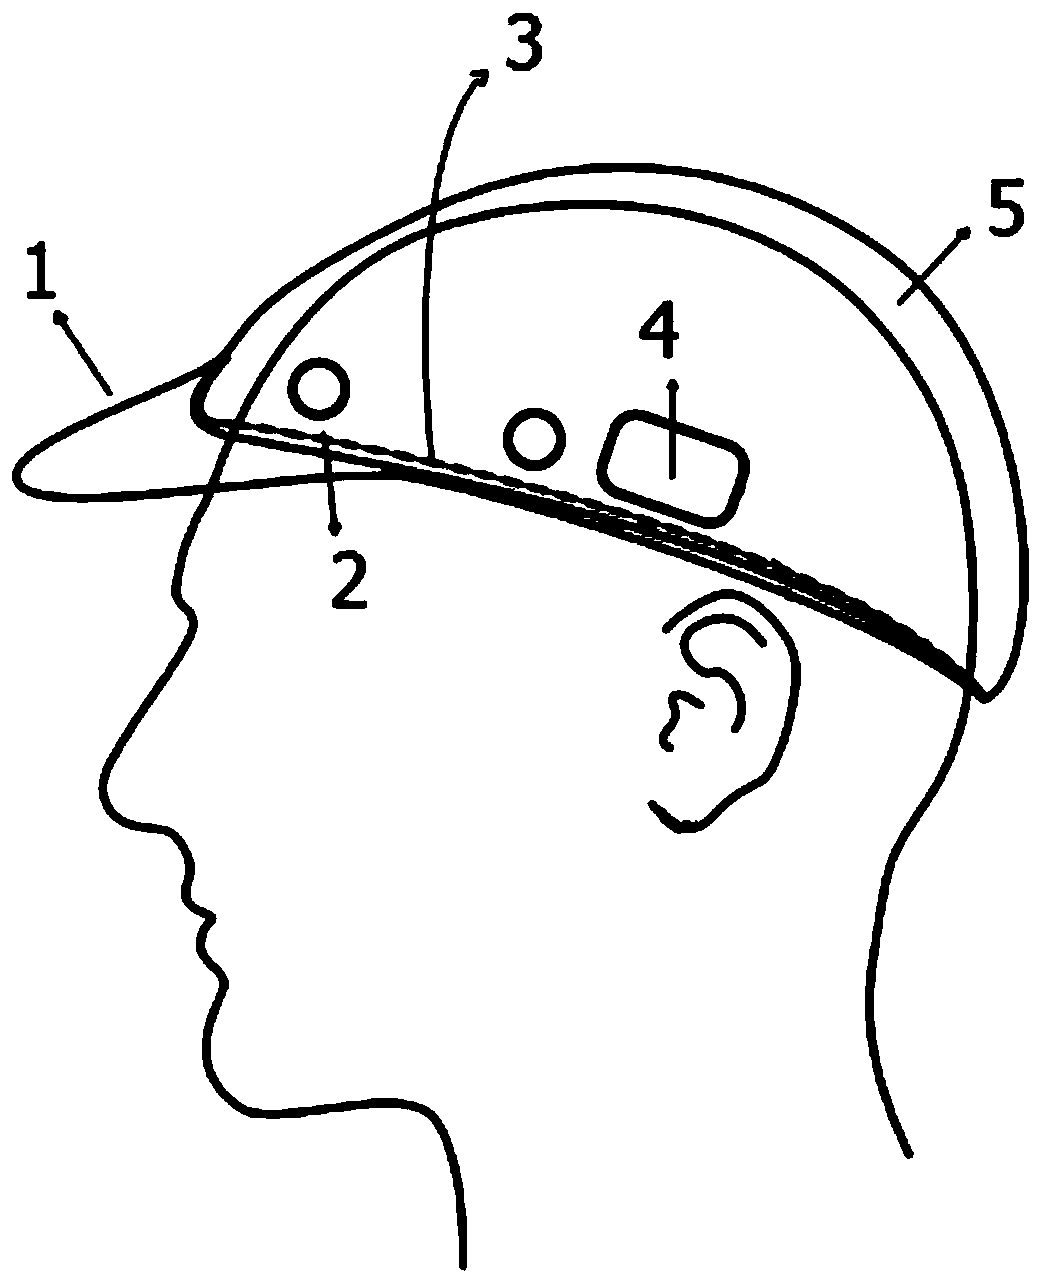 Wearable driver anti-fatigue intelligent monitoring and early warning system based on EEG